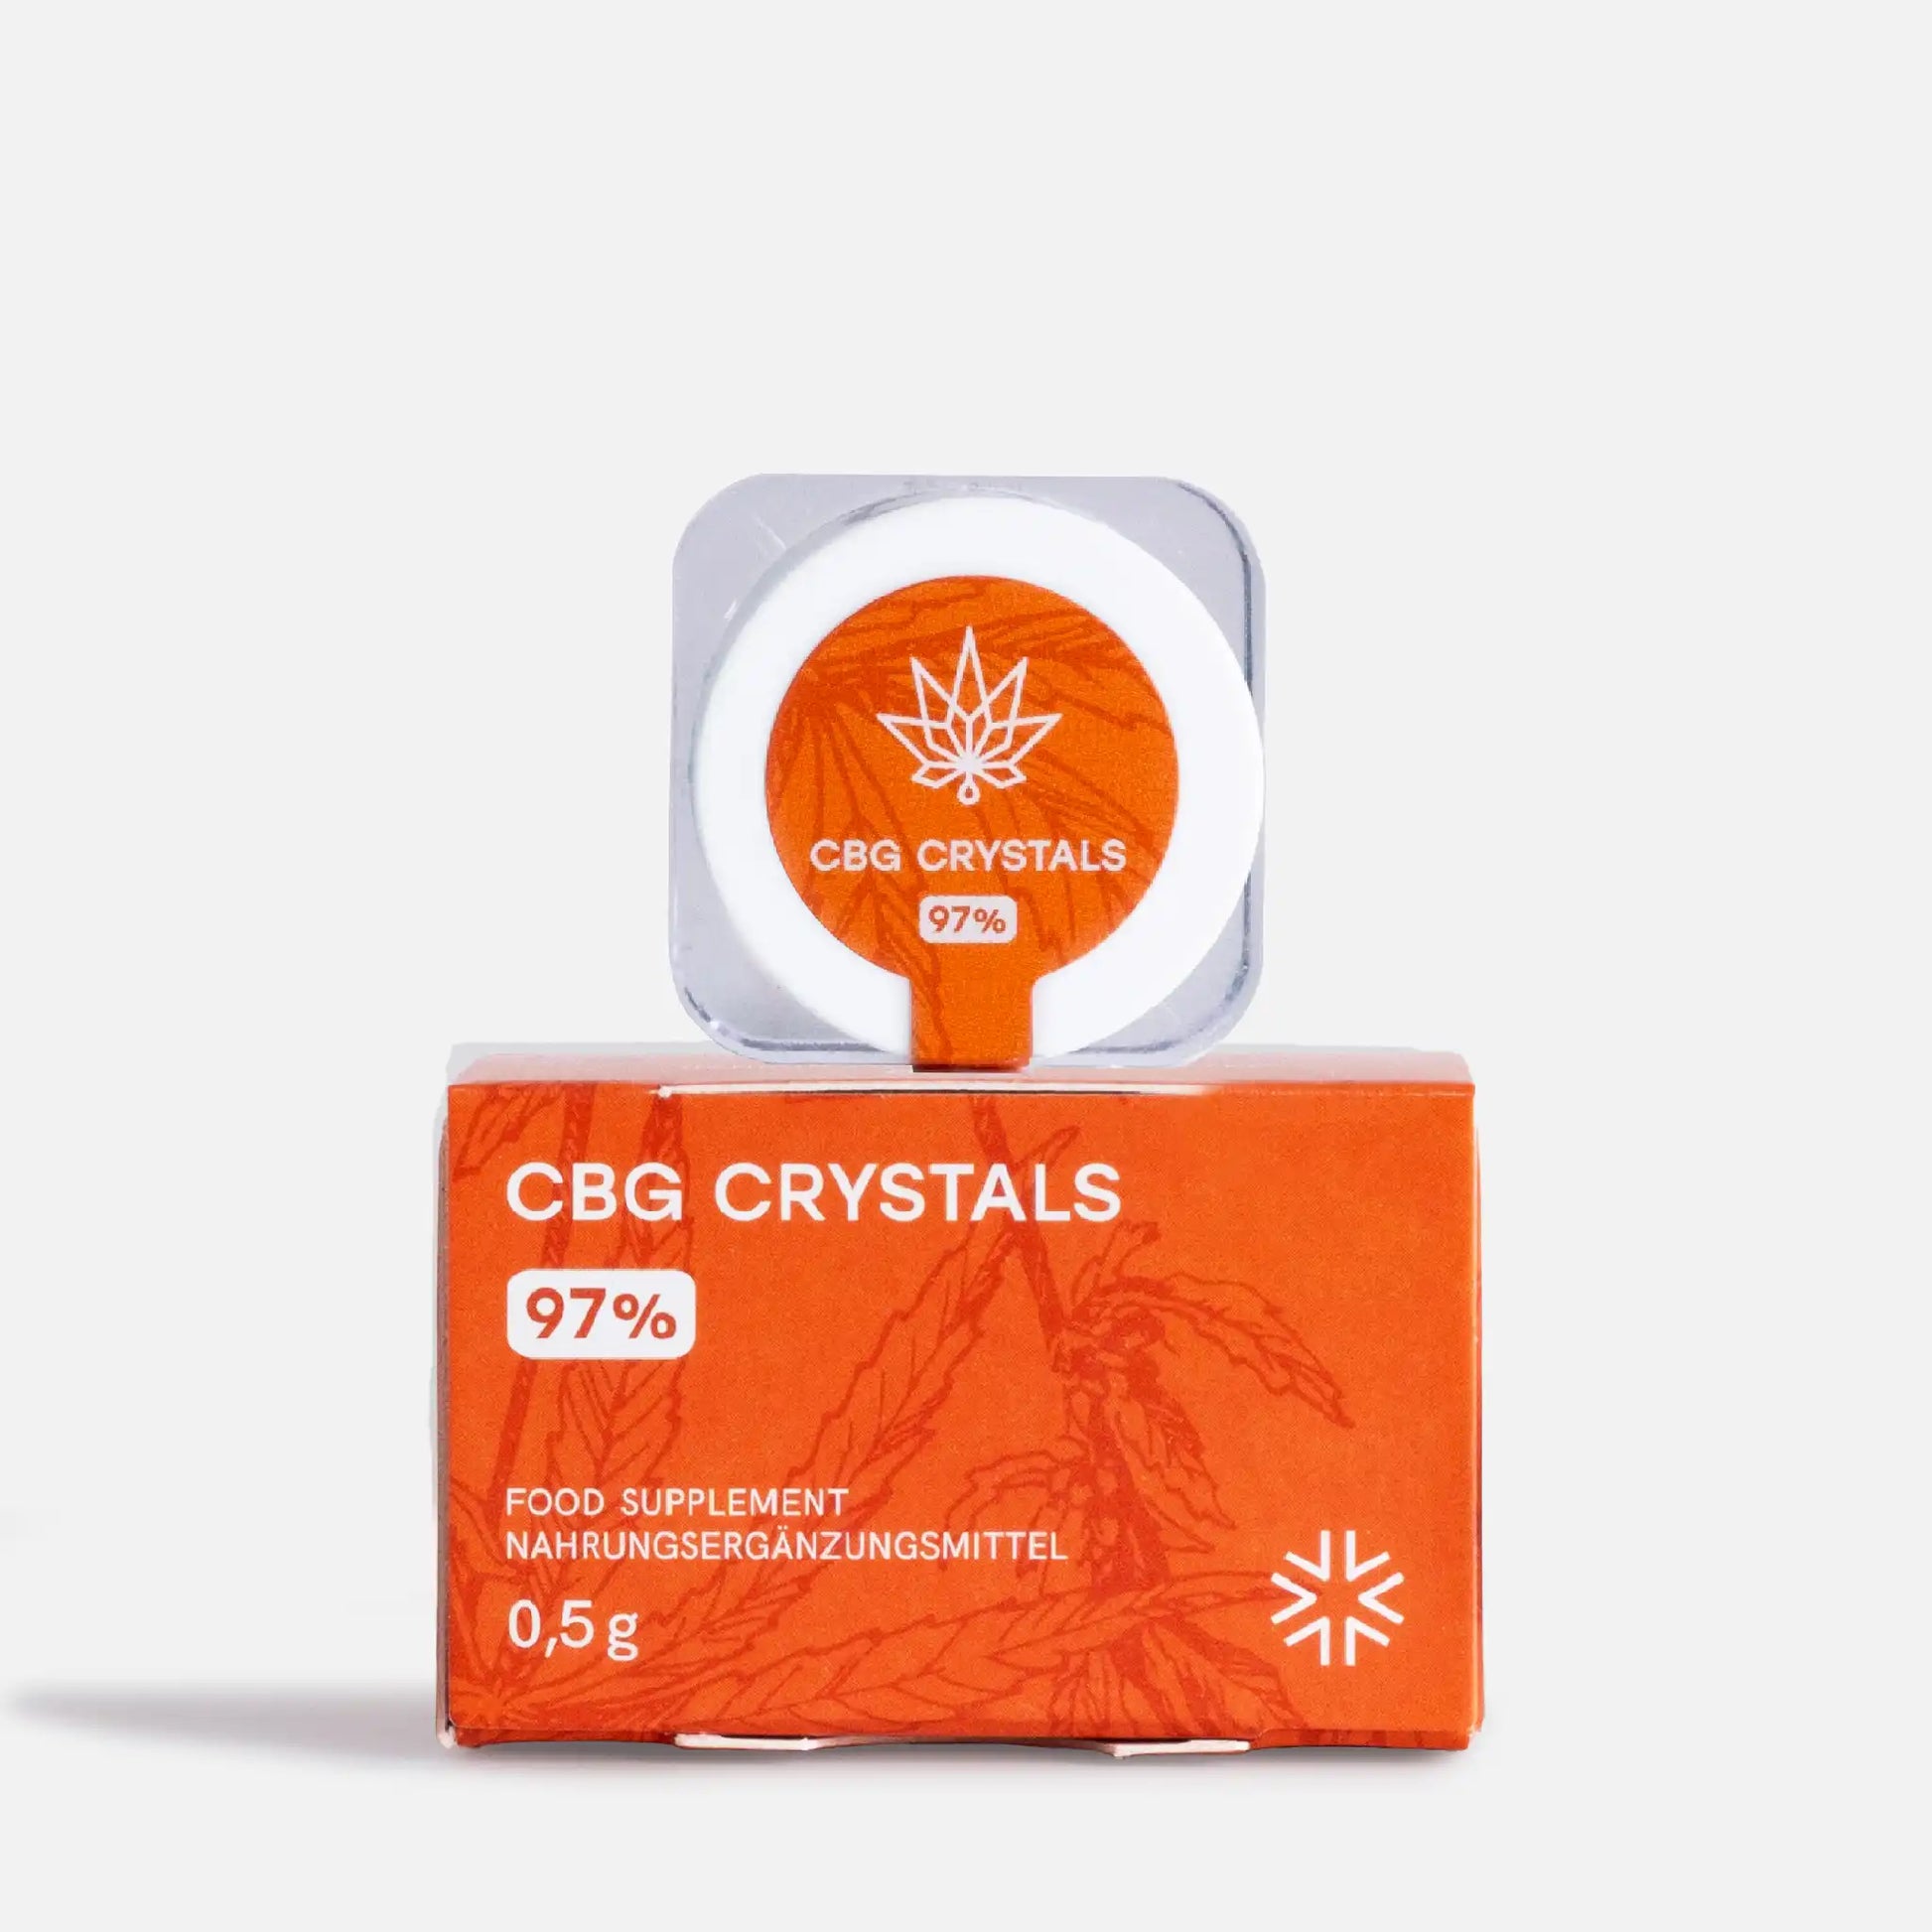 PACKAGE OF CBg CRYSTALS